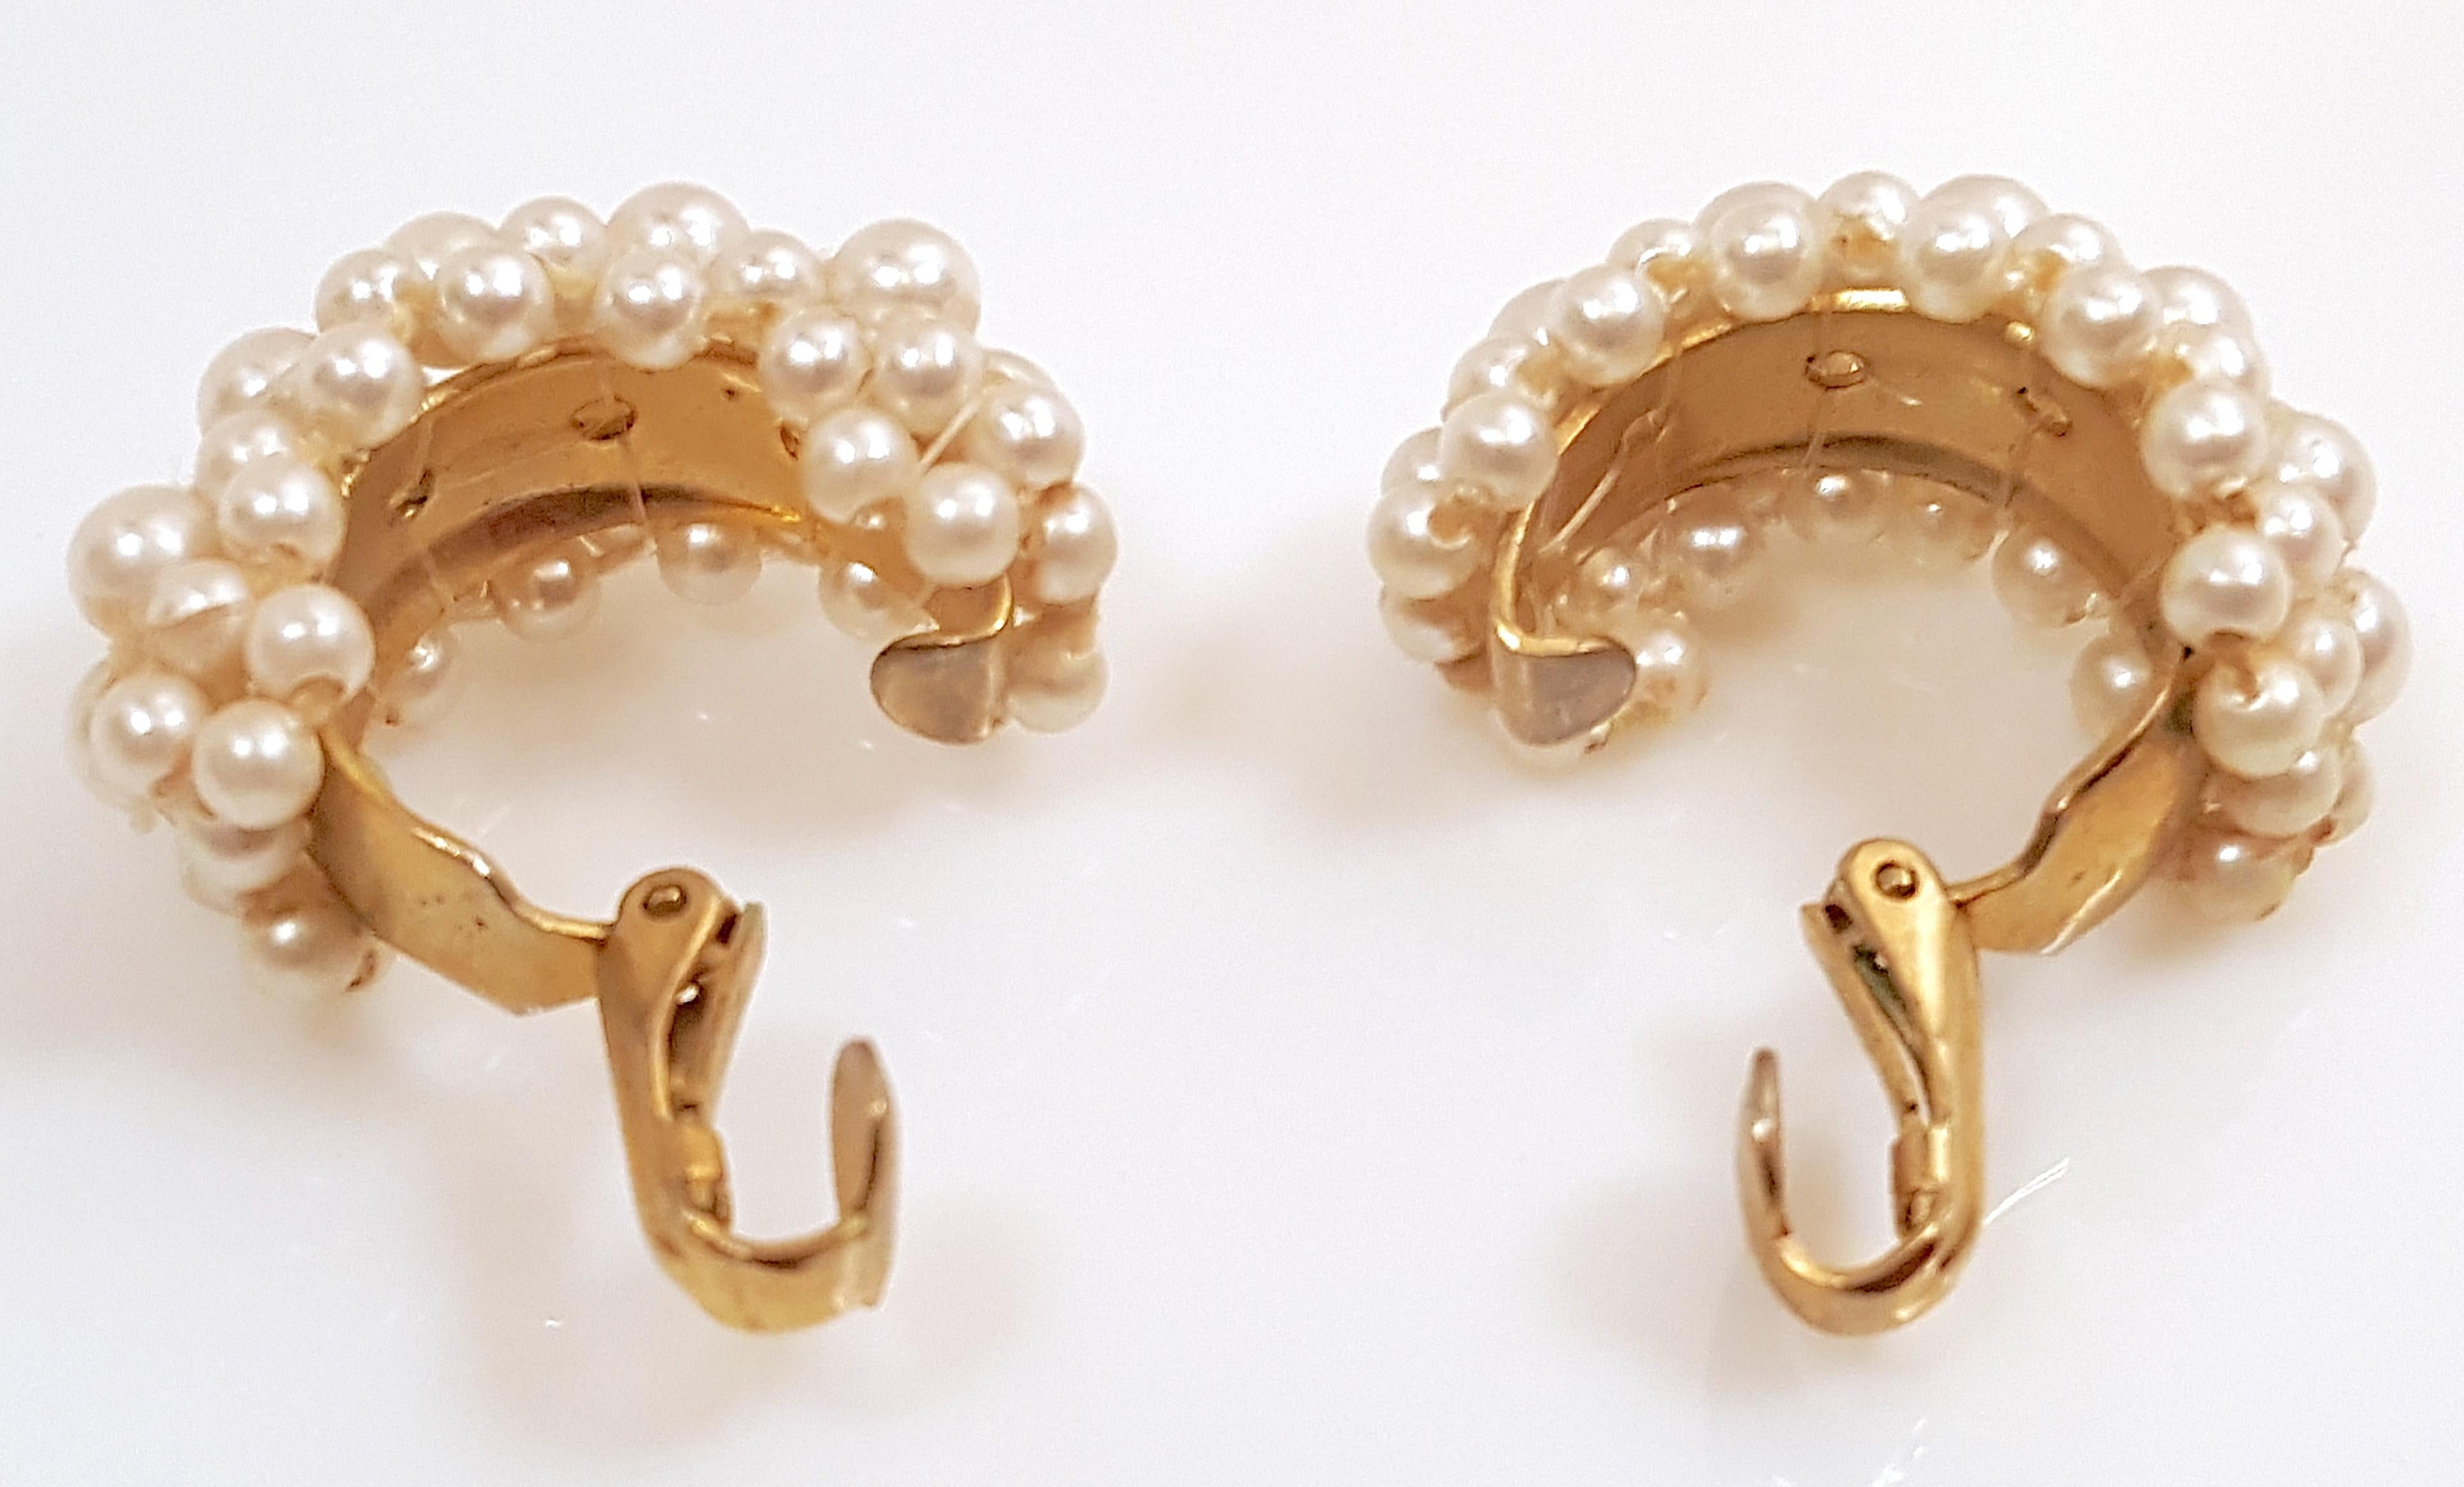 Baroque Revival MiriamHaskell 1940s FrankHess Clustered FauxPearl YellowGold FrenchClip Earrings For Sale